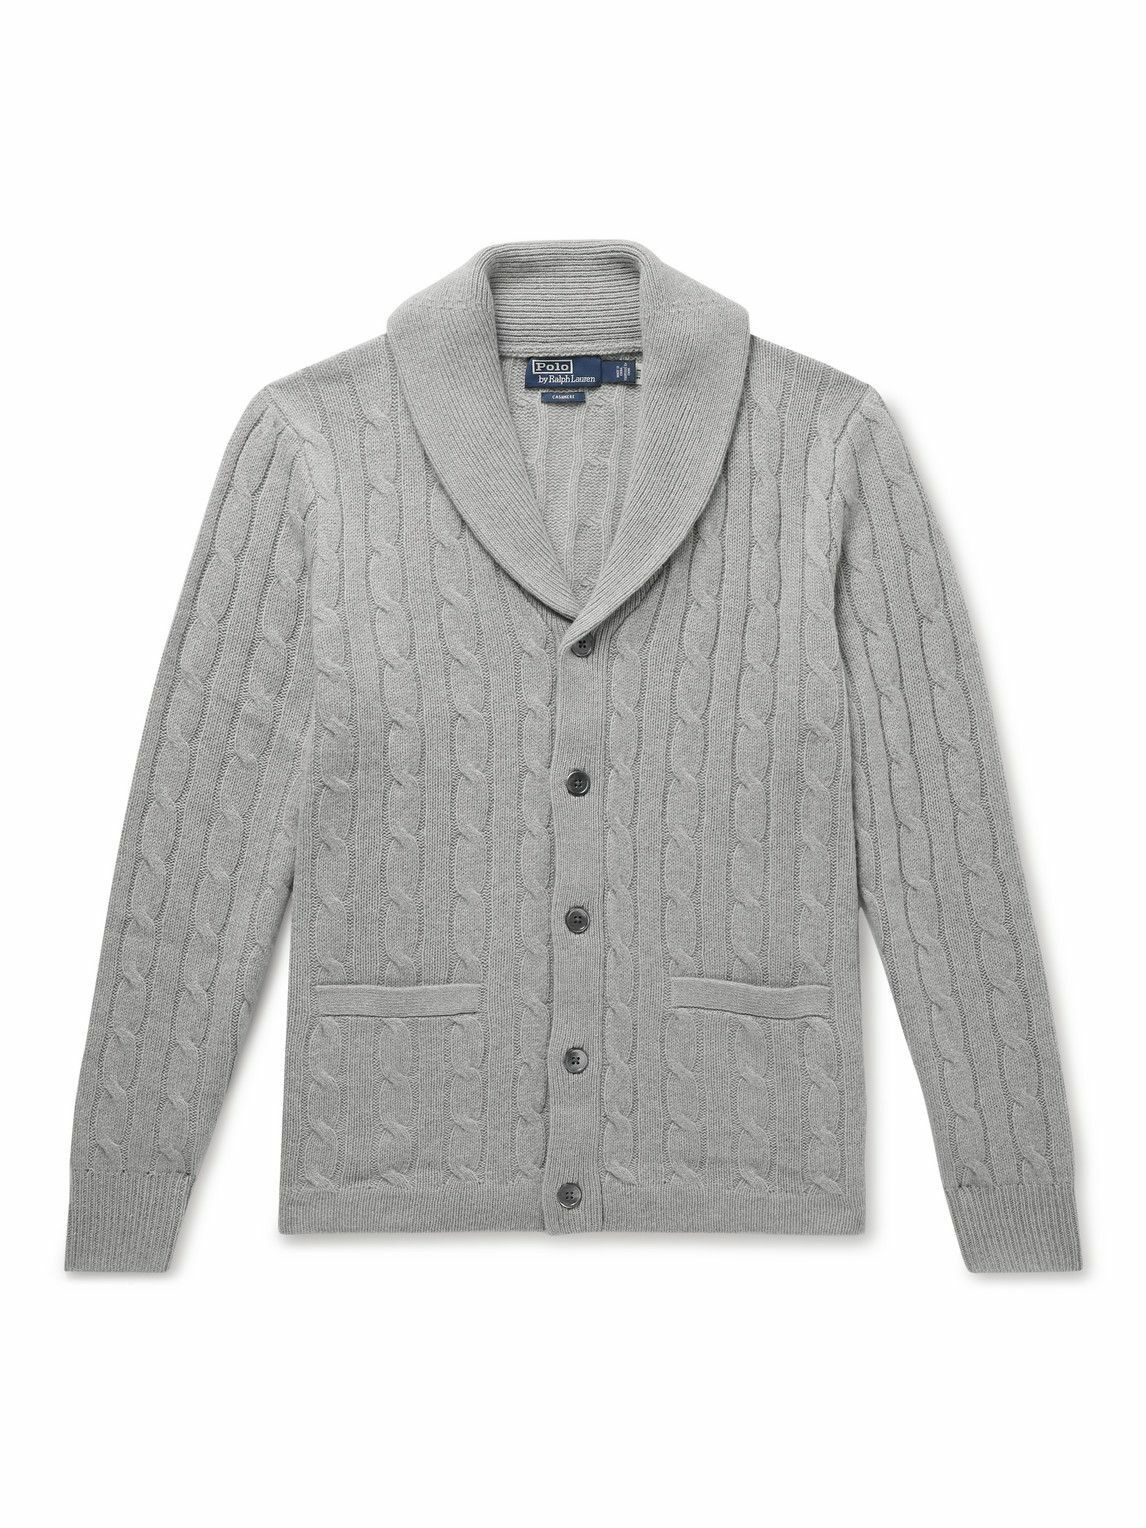 Polo Ralph Lauren - Shawl-Collar Cable-Knit Cashmere Cardigan - Gray ...